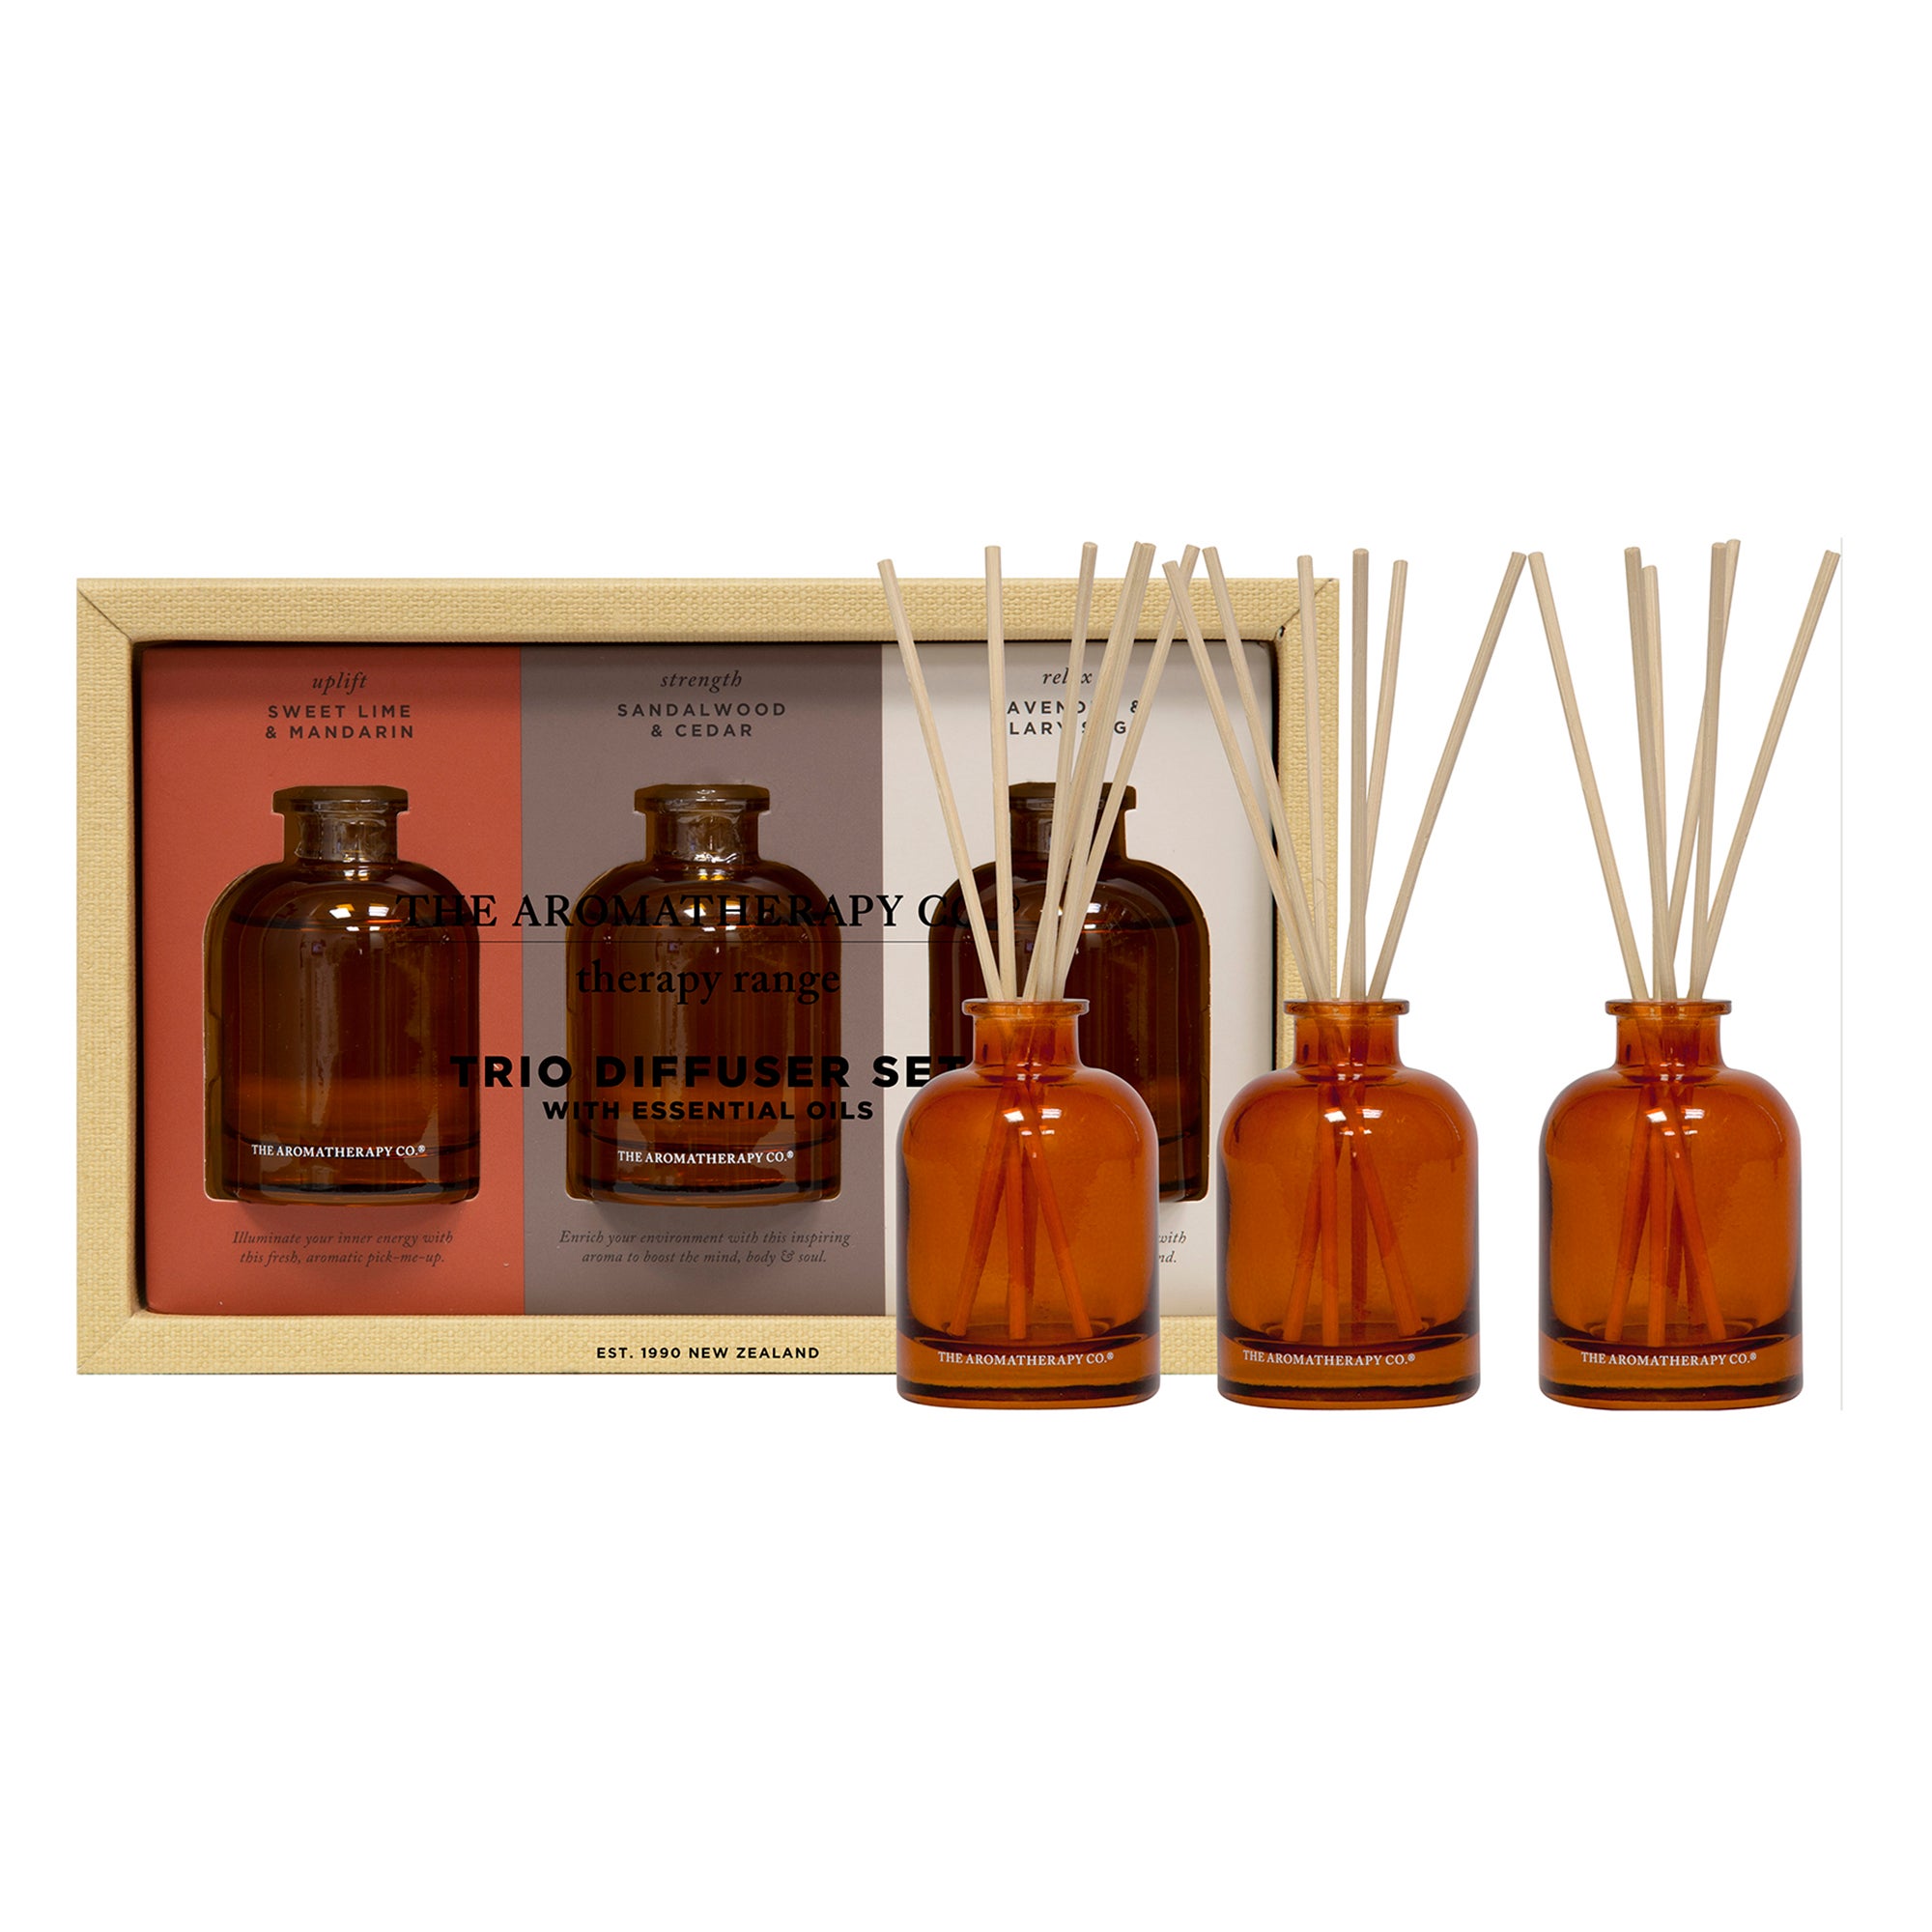 The Aromatherapy Co Therapy Diffuser Gift Set